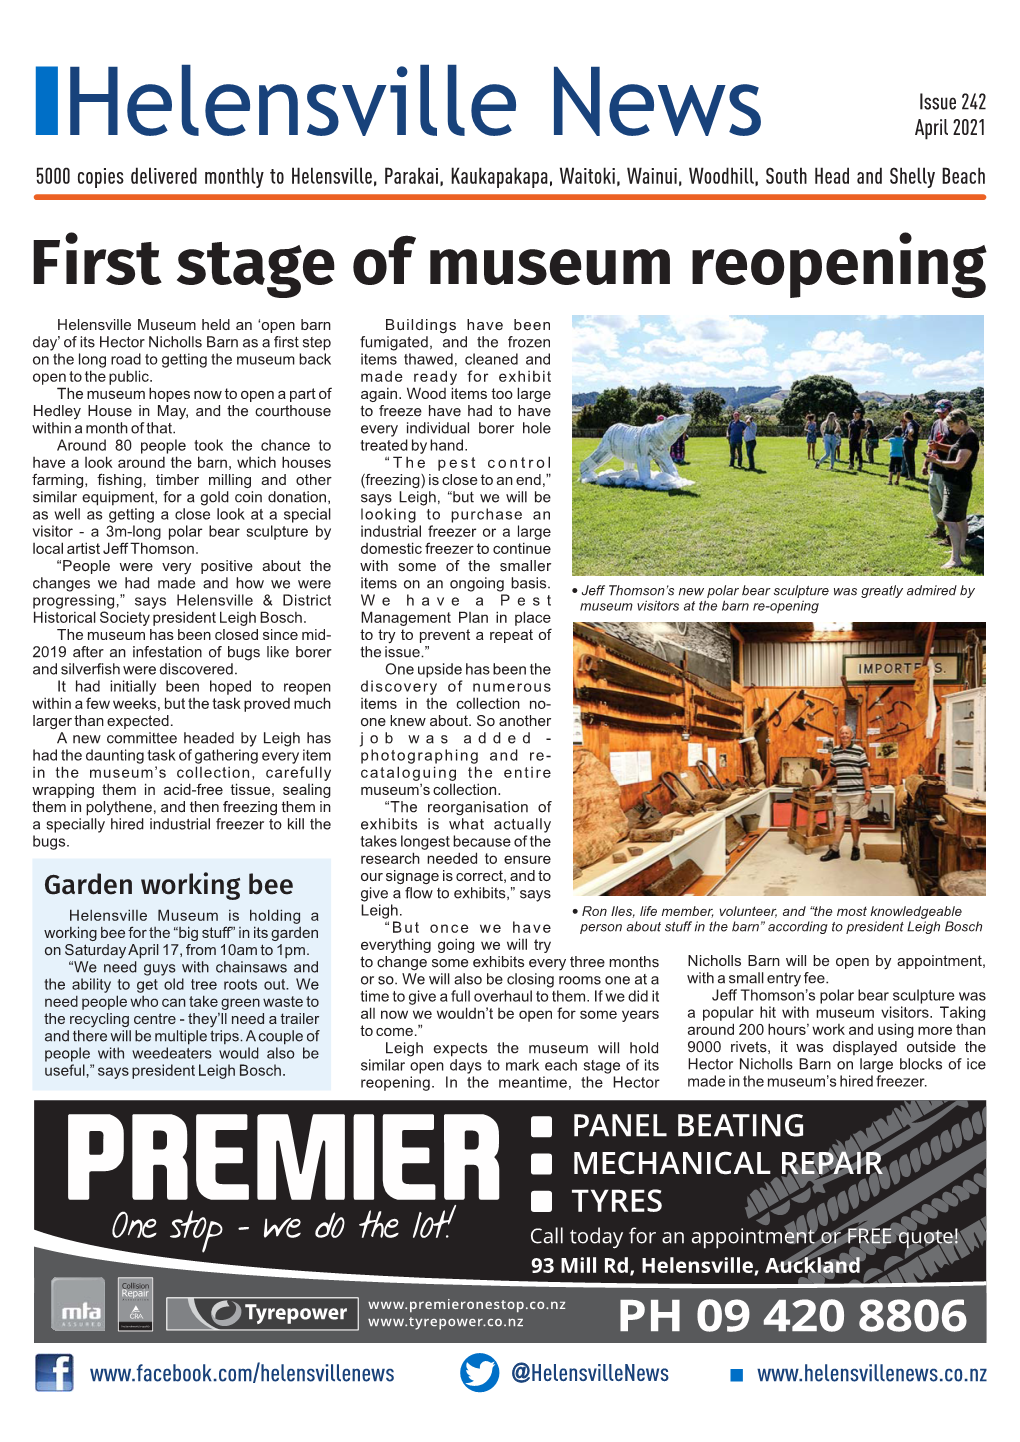 April 2021 5000 Copies Delivered Monthly to Helensville, Parakai, Kaukapakapa, Waitoki, Wainui, Woodhill, South Head and Shelly Beach First Stage of Museum Reopening